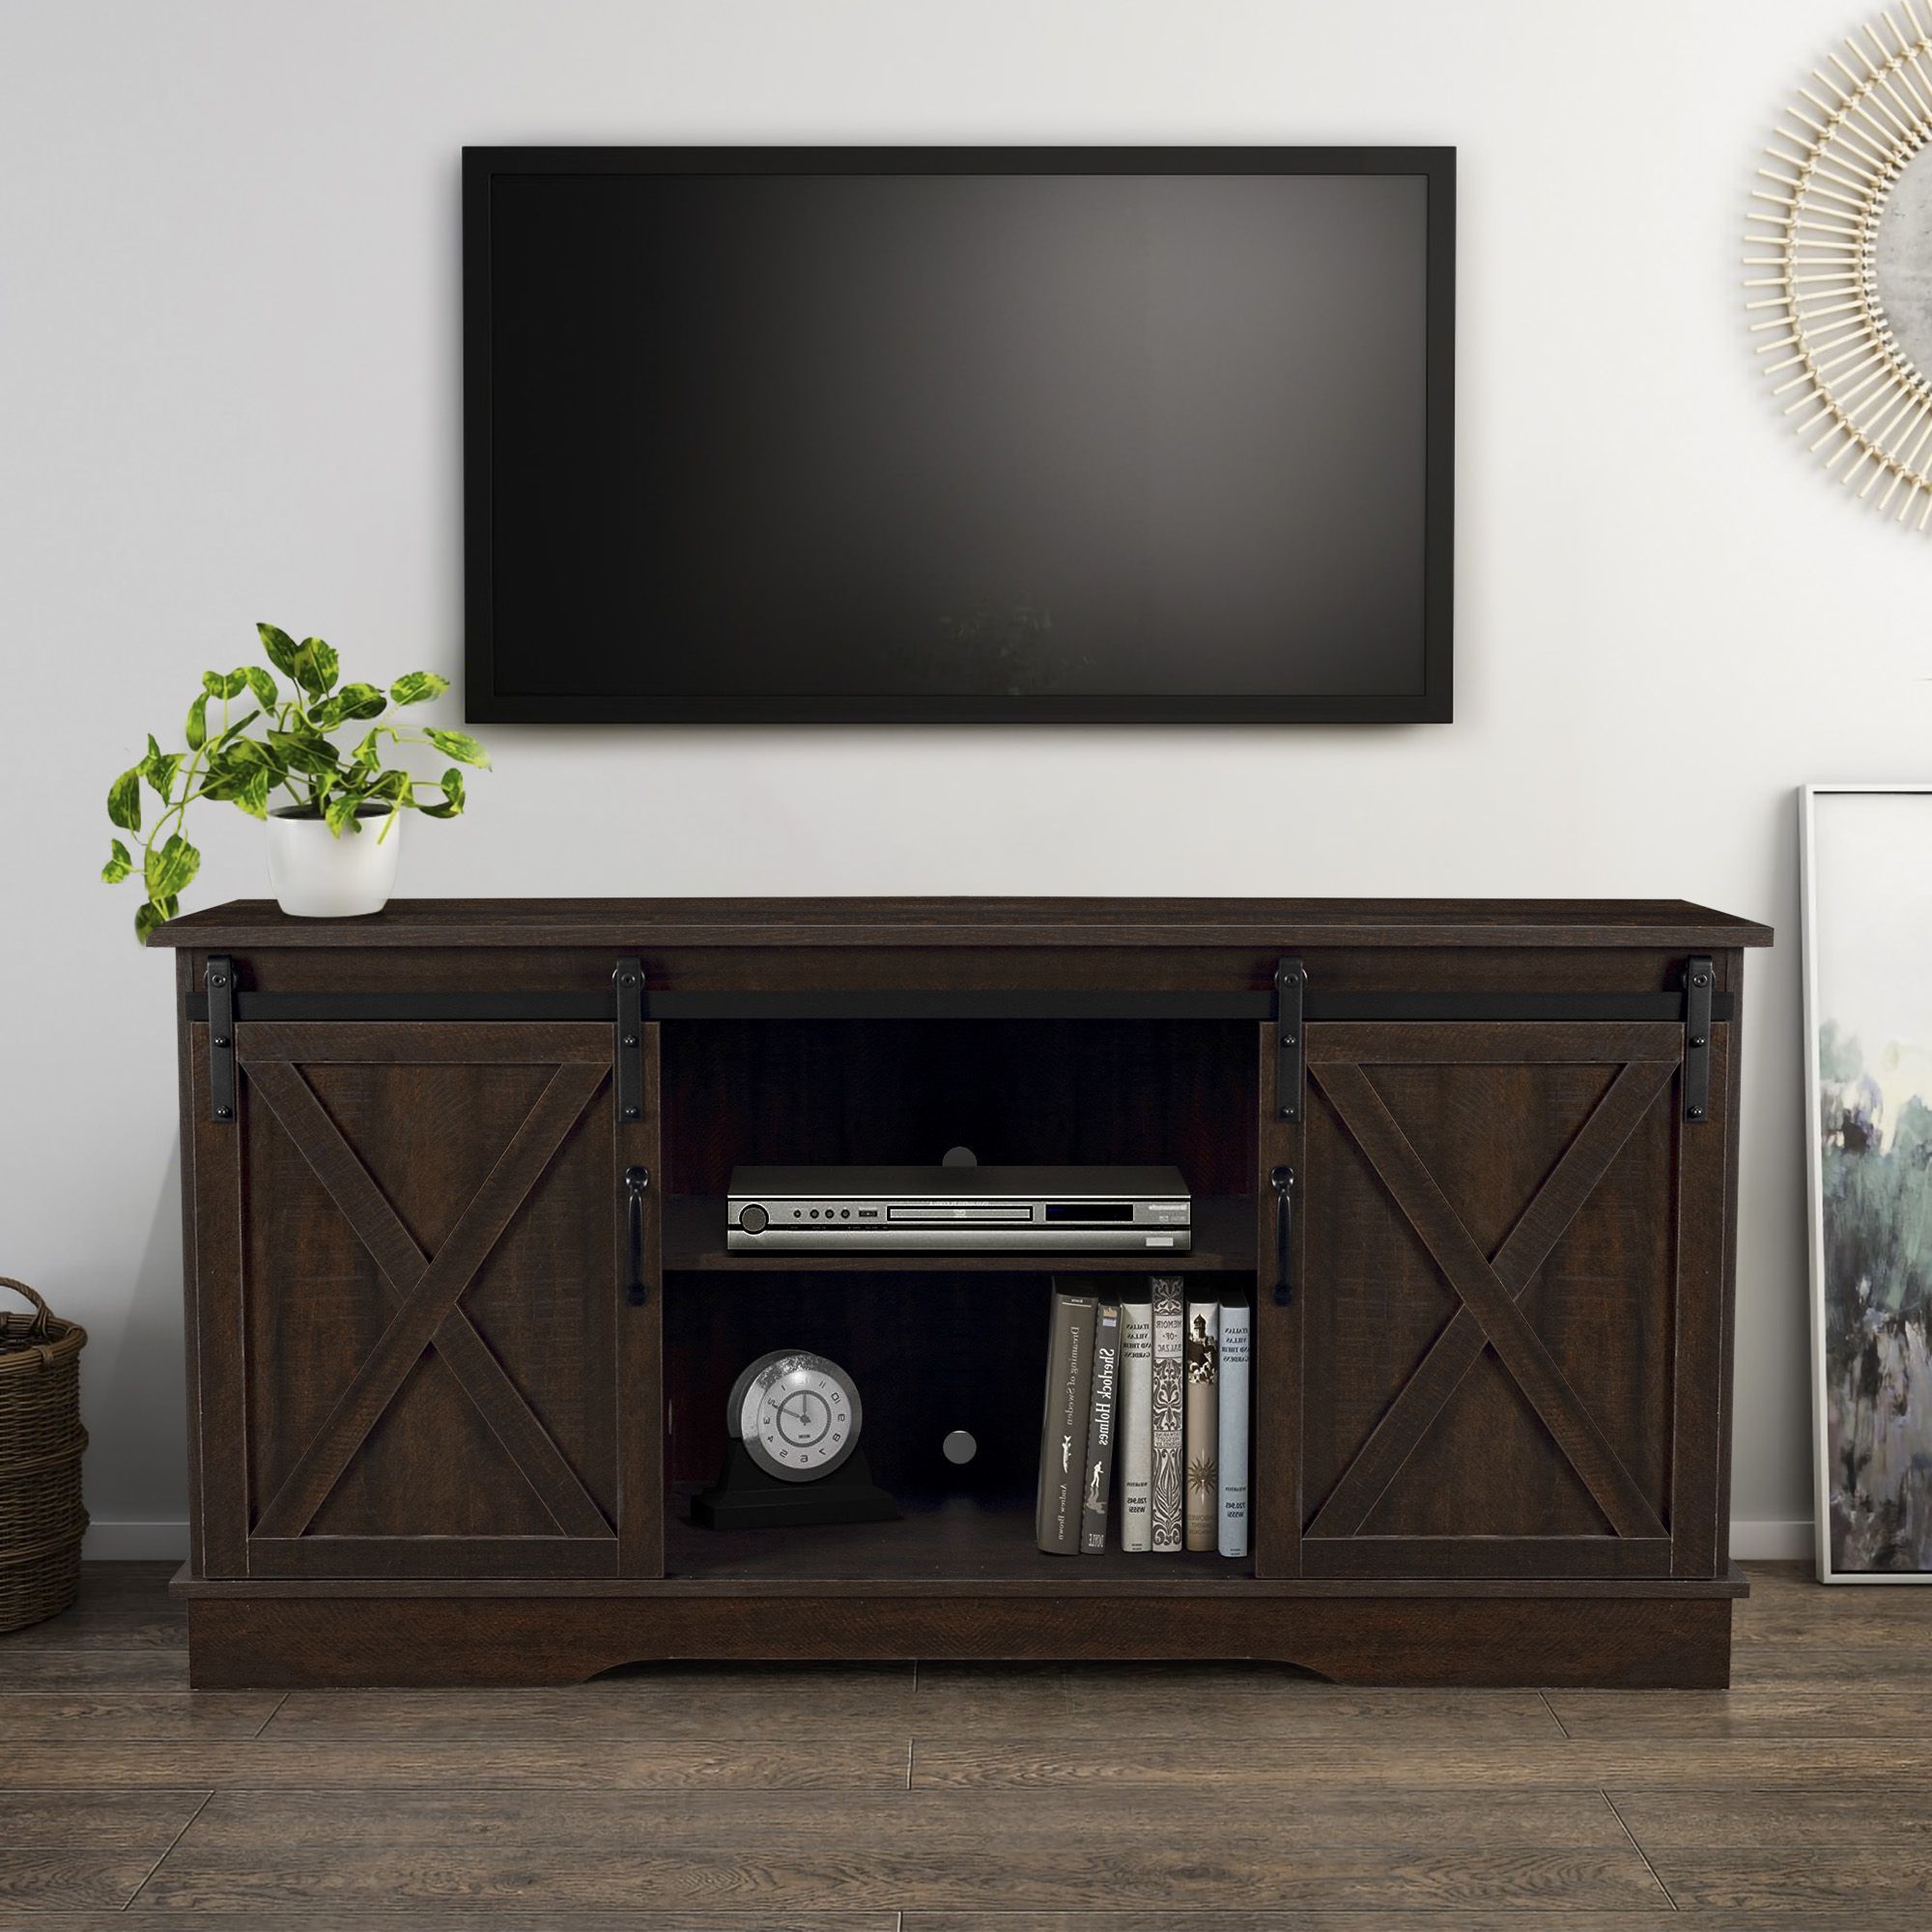 Belleze Modern Farmhouse Style 58 Inch Tv Stand With Pertaining To Modern Black Tabletop Tv Stands (View 8 of 20)